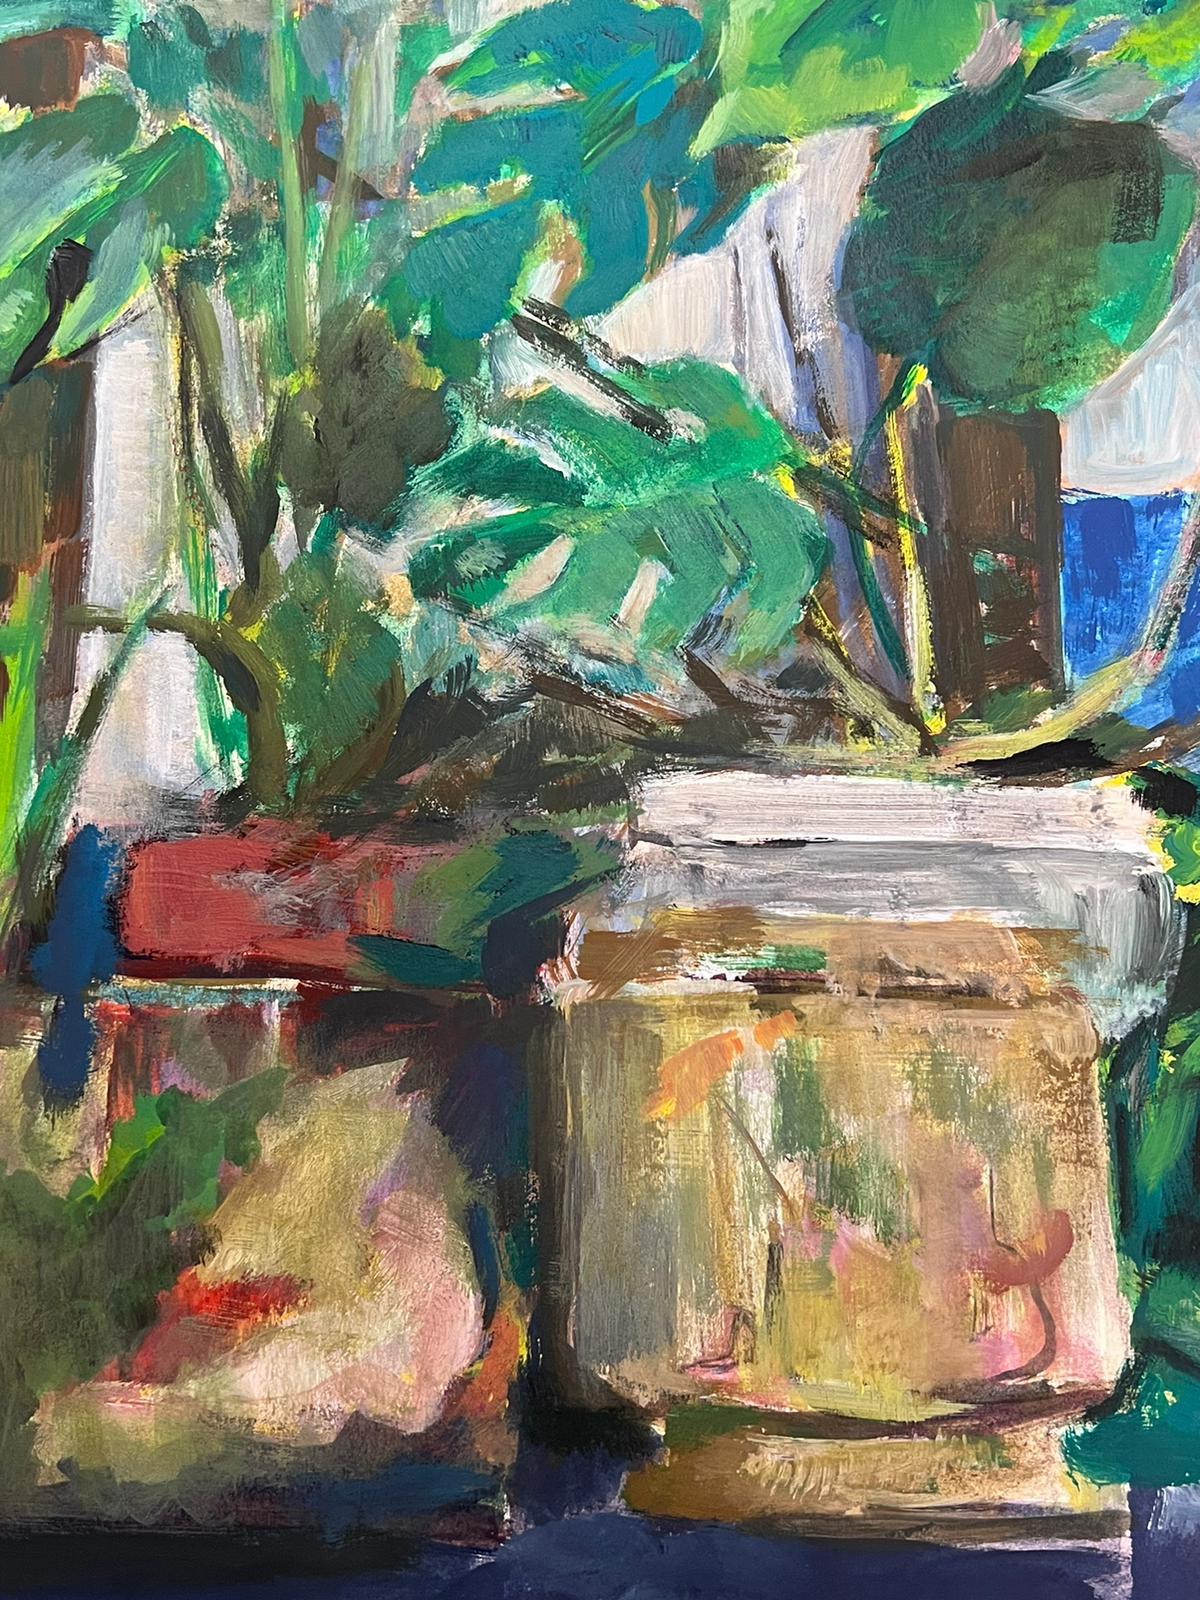 Plant Still Life
by Guy Nicod
(French 1923 - 2021)
oil on artist paper, unframed
painting : 18 x 24 inches
provenance: artists estate, France
condition: very good and sound condition